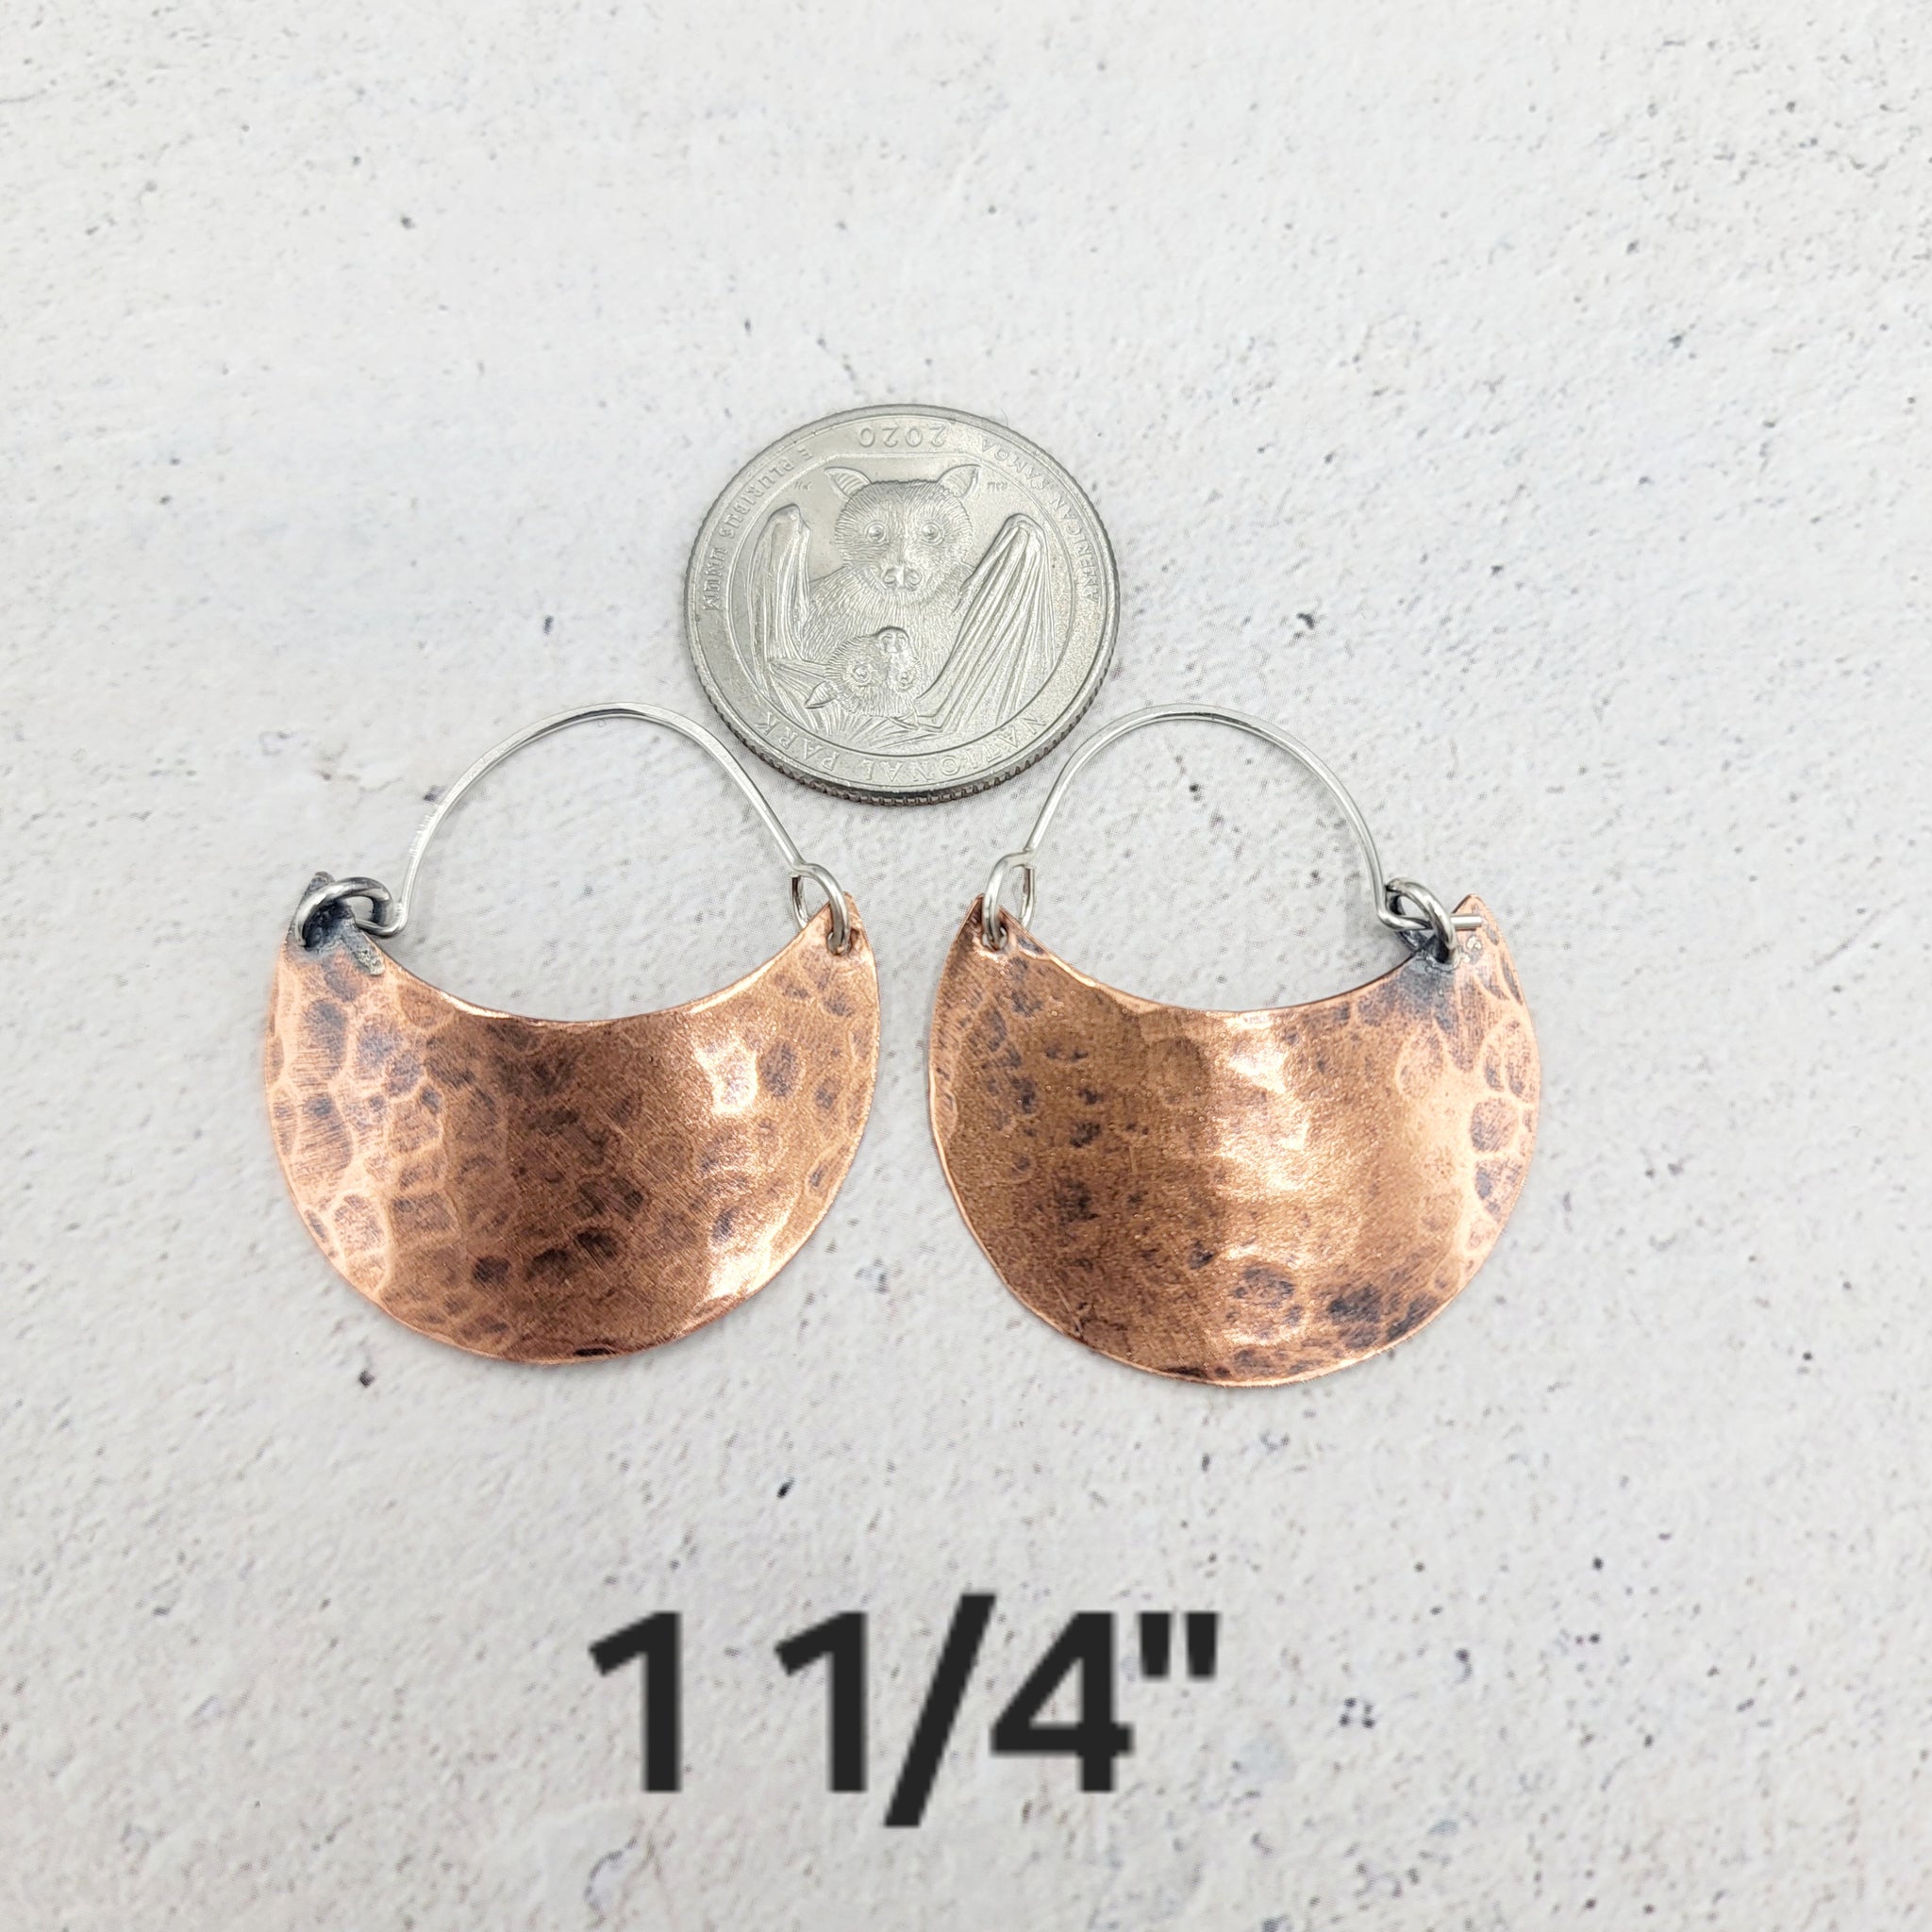 Hammered Copper Crescent Earrings in 4 Sizes